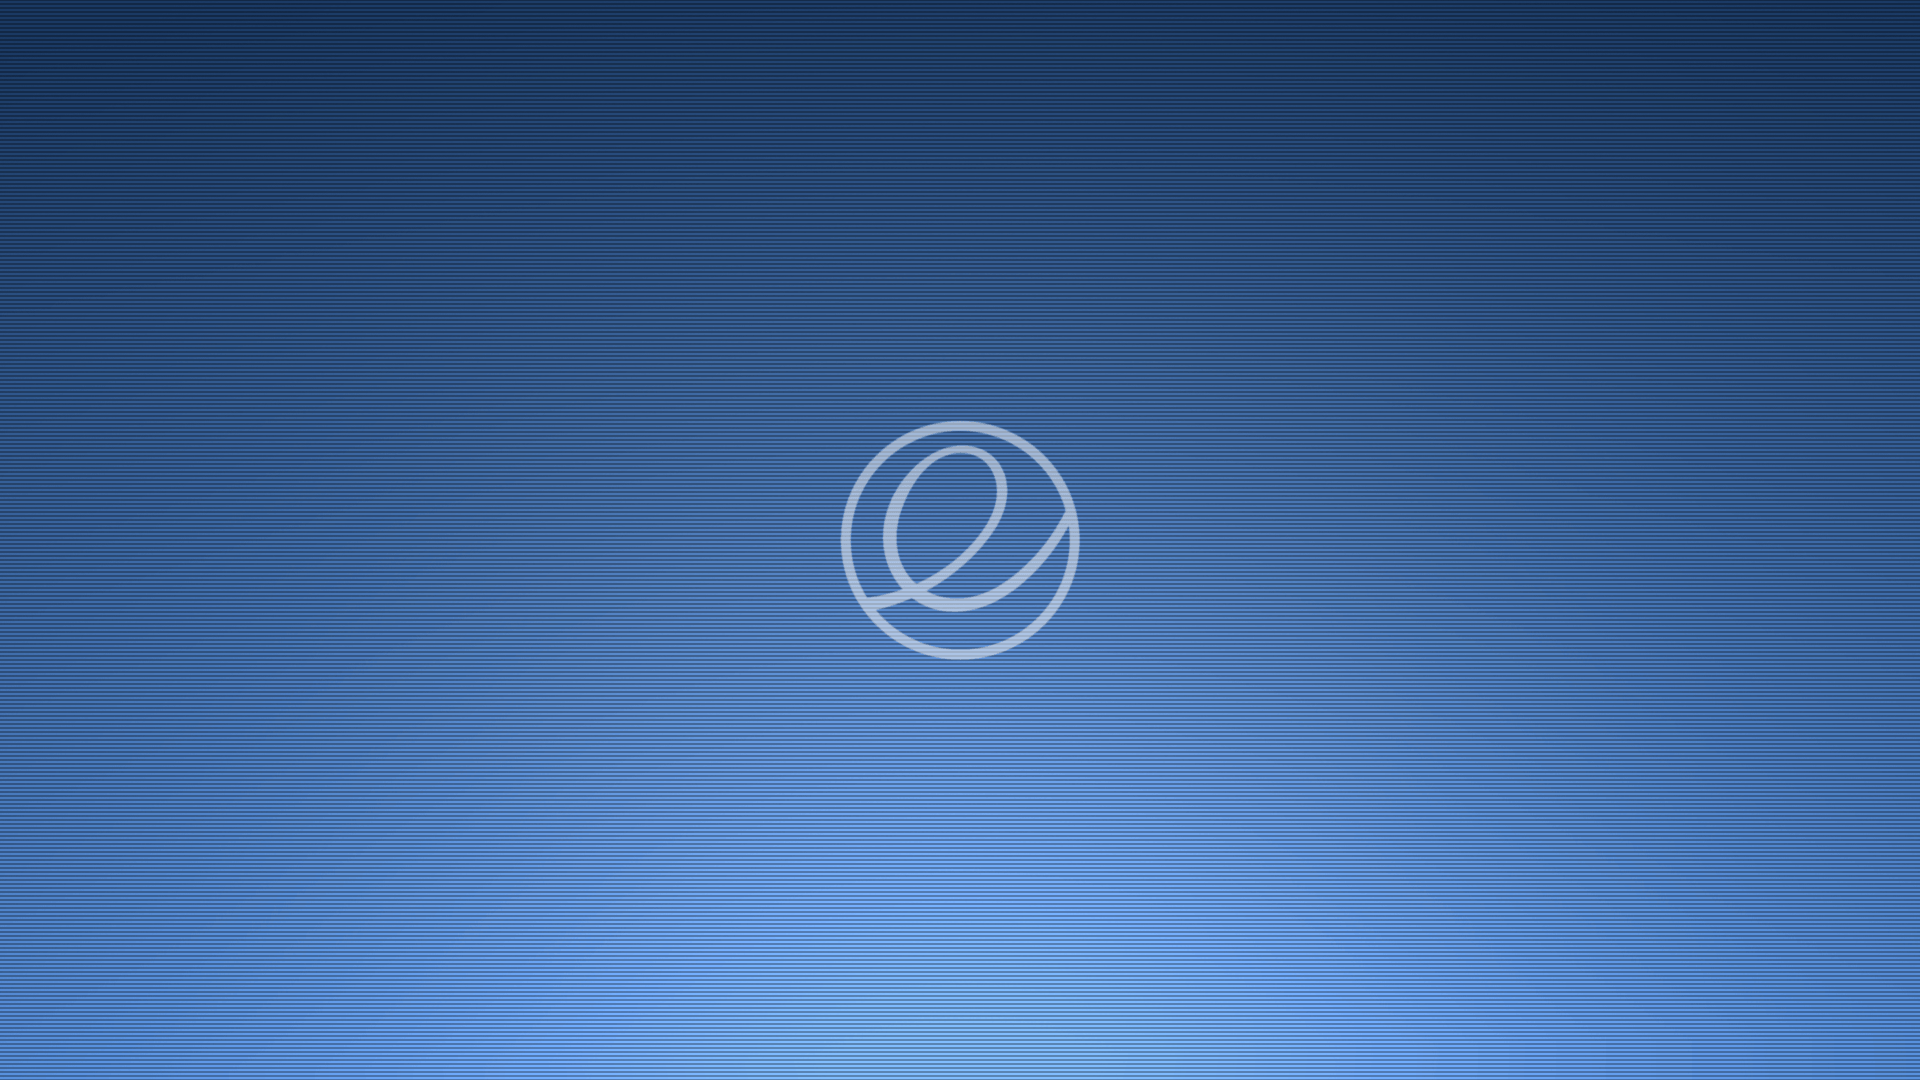 Check Out These Beautiful elementary OS Wallpaper